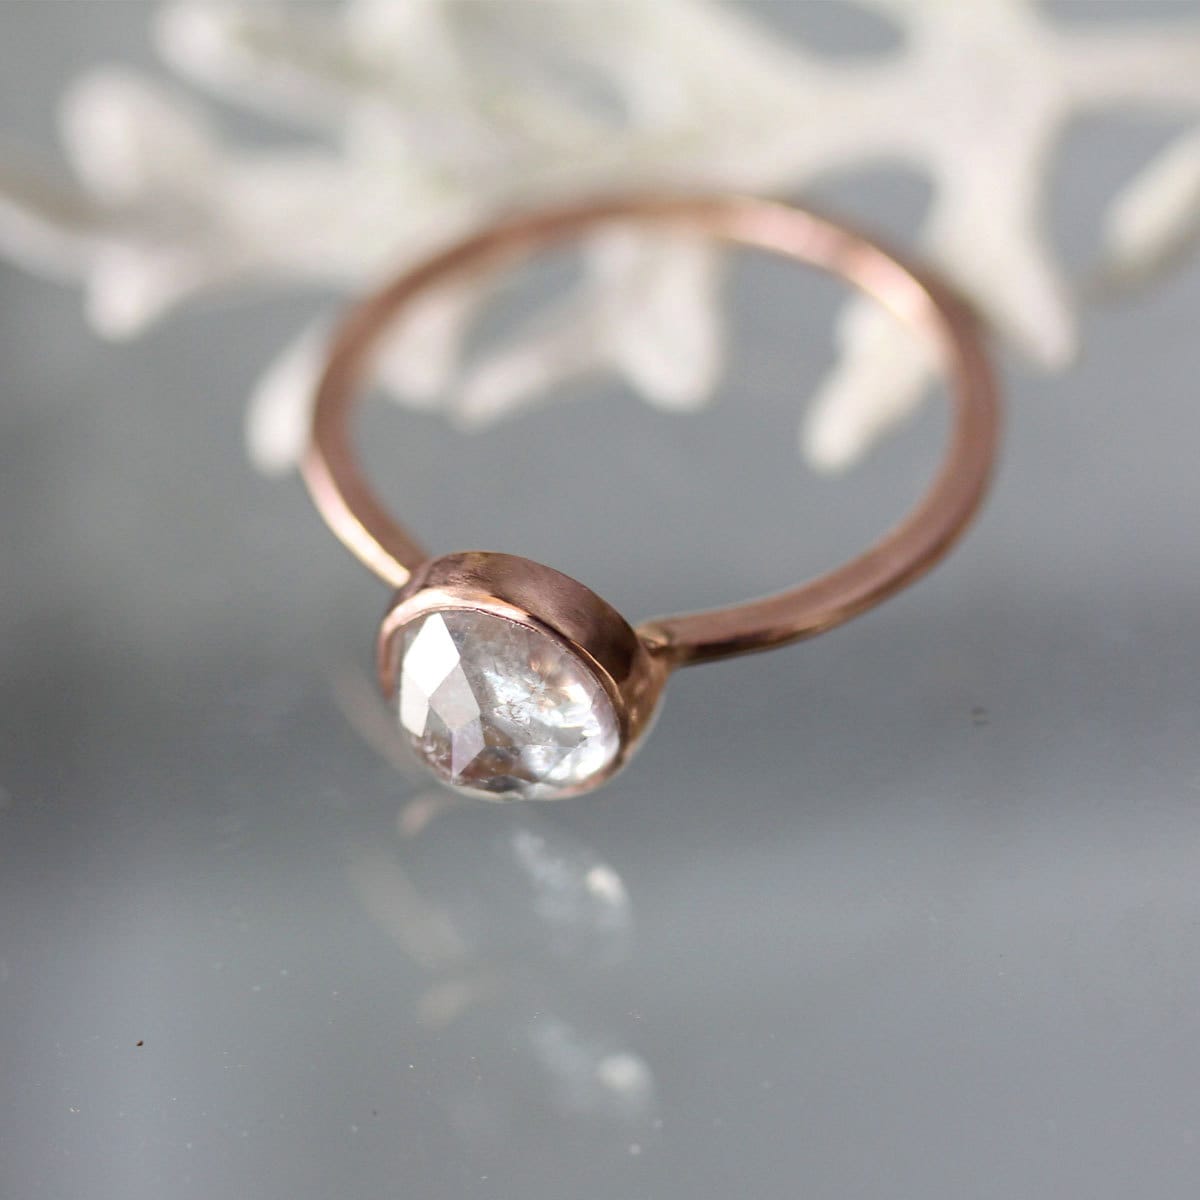 white sapphire ring rose gold